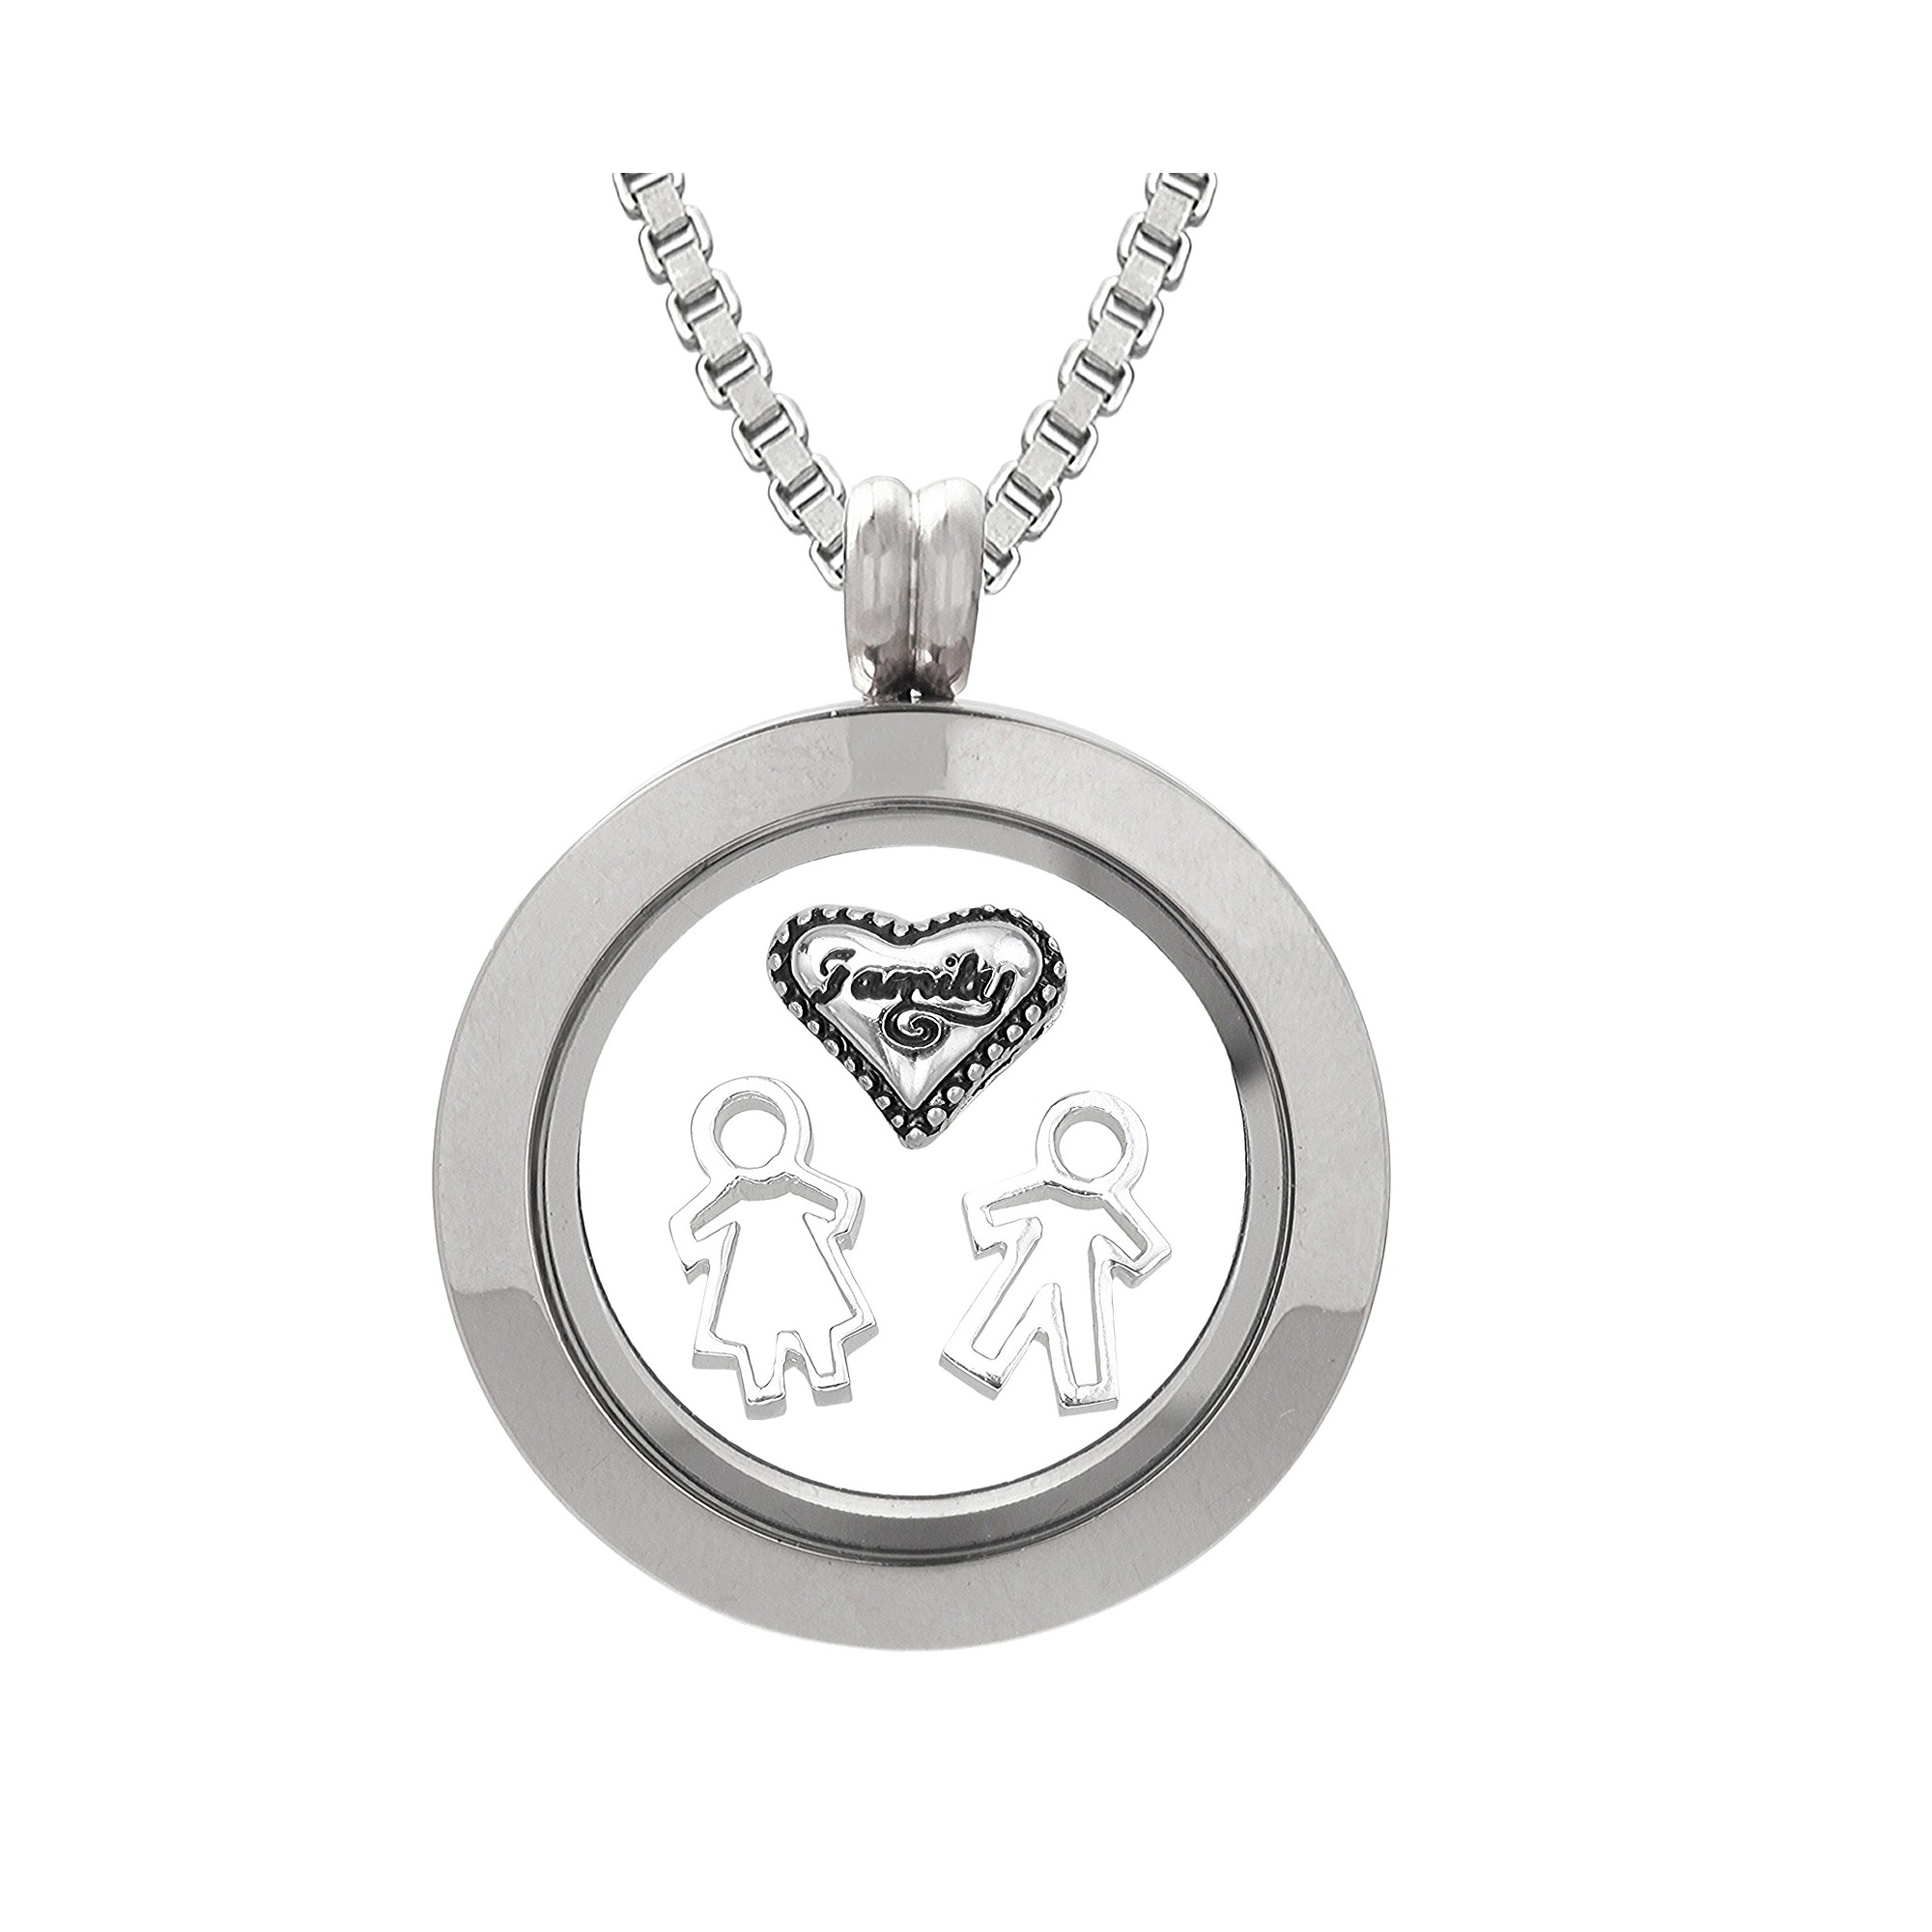 Treasure Lockets Silver Plated Stainless Steel Family Charm Locket and Box Chain Necklace Set, Women's, Silver/Silver/Silver